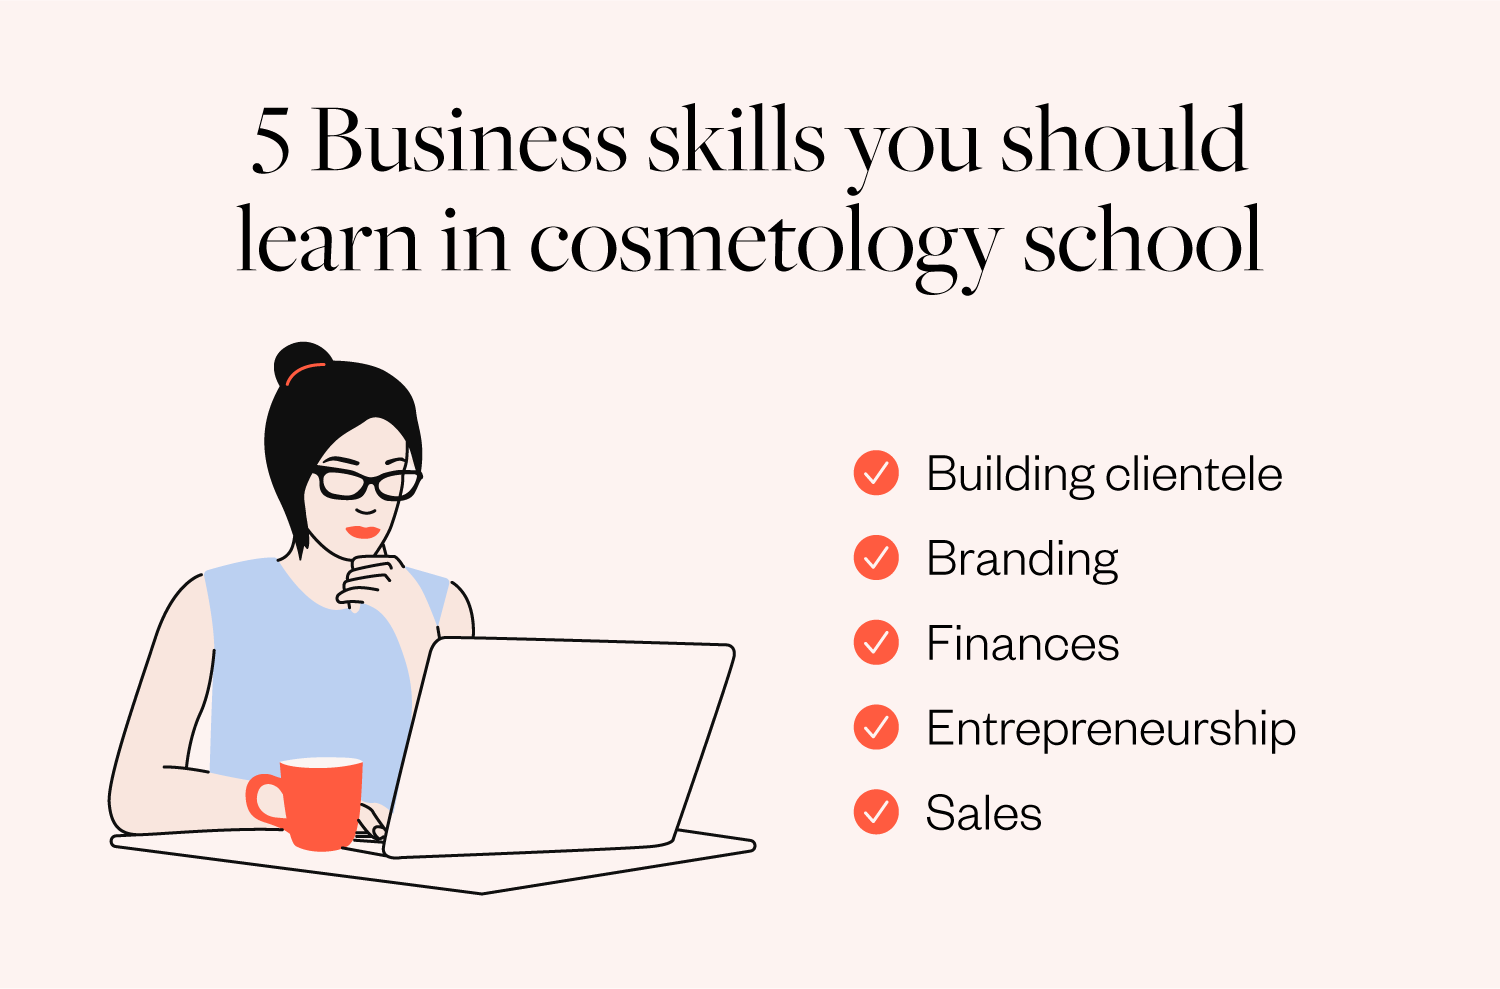 02-Business-skills-you-learn-in-cosmetology-school